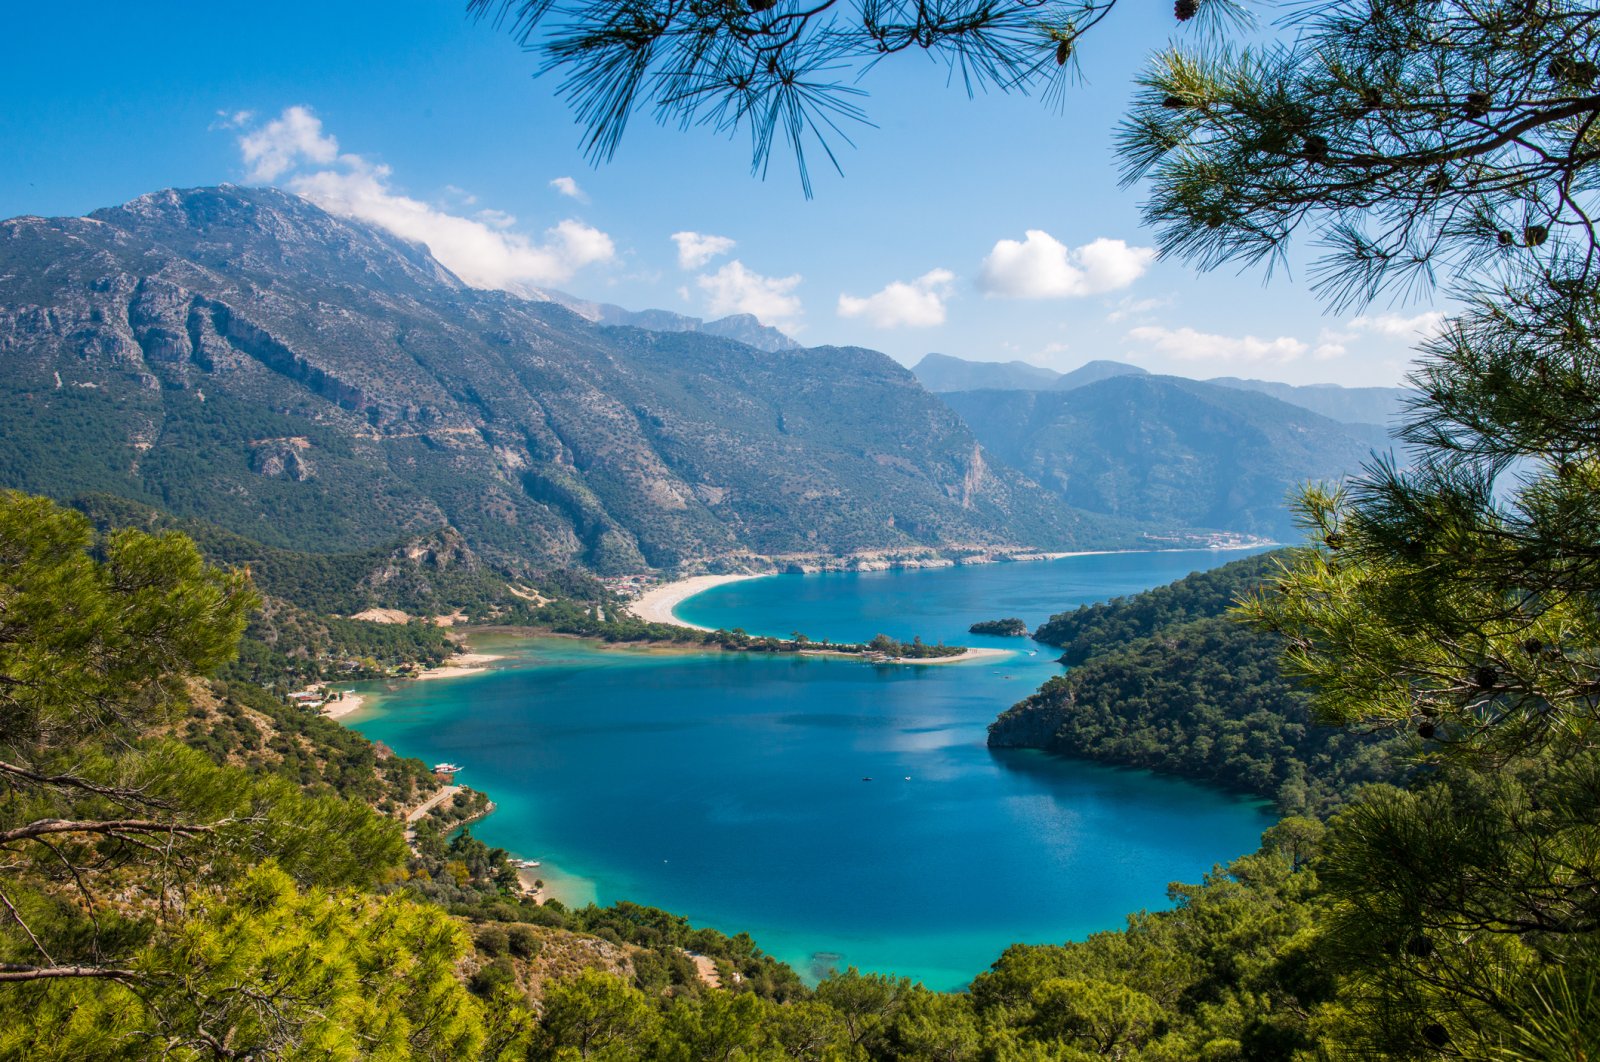 With its mountains, seas and rivers, Turkey has an activity for every kind of adventurer. (iStock Photo)